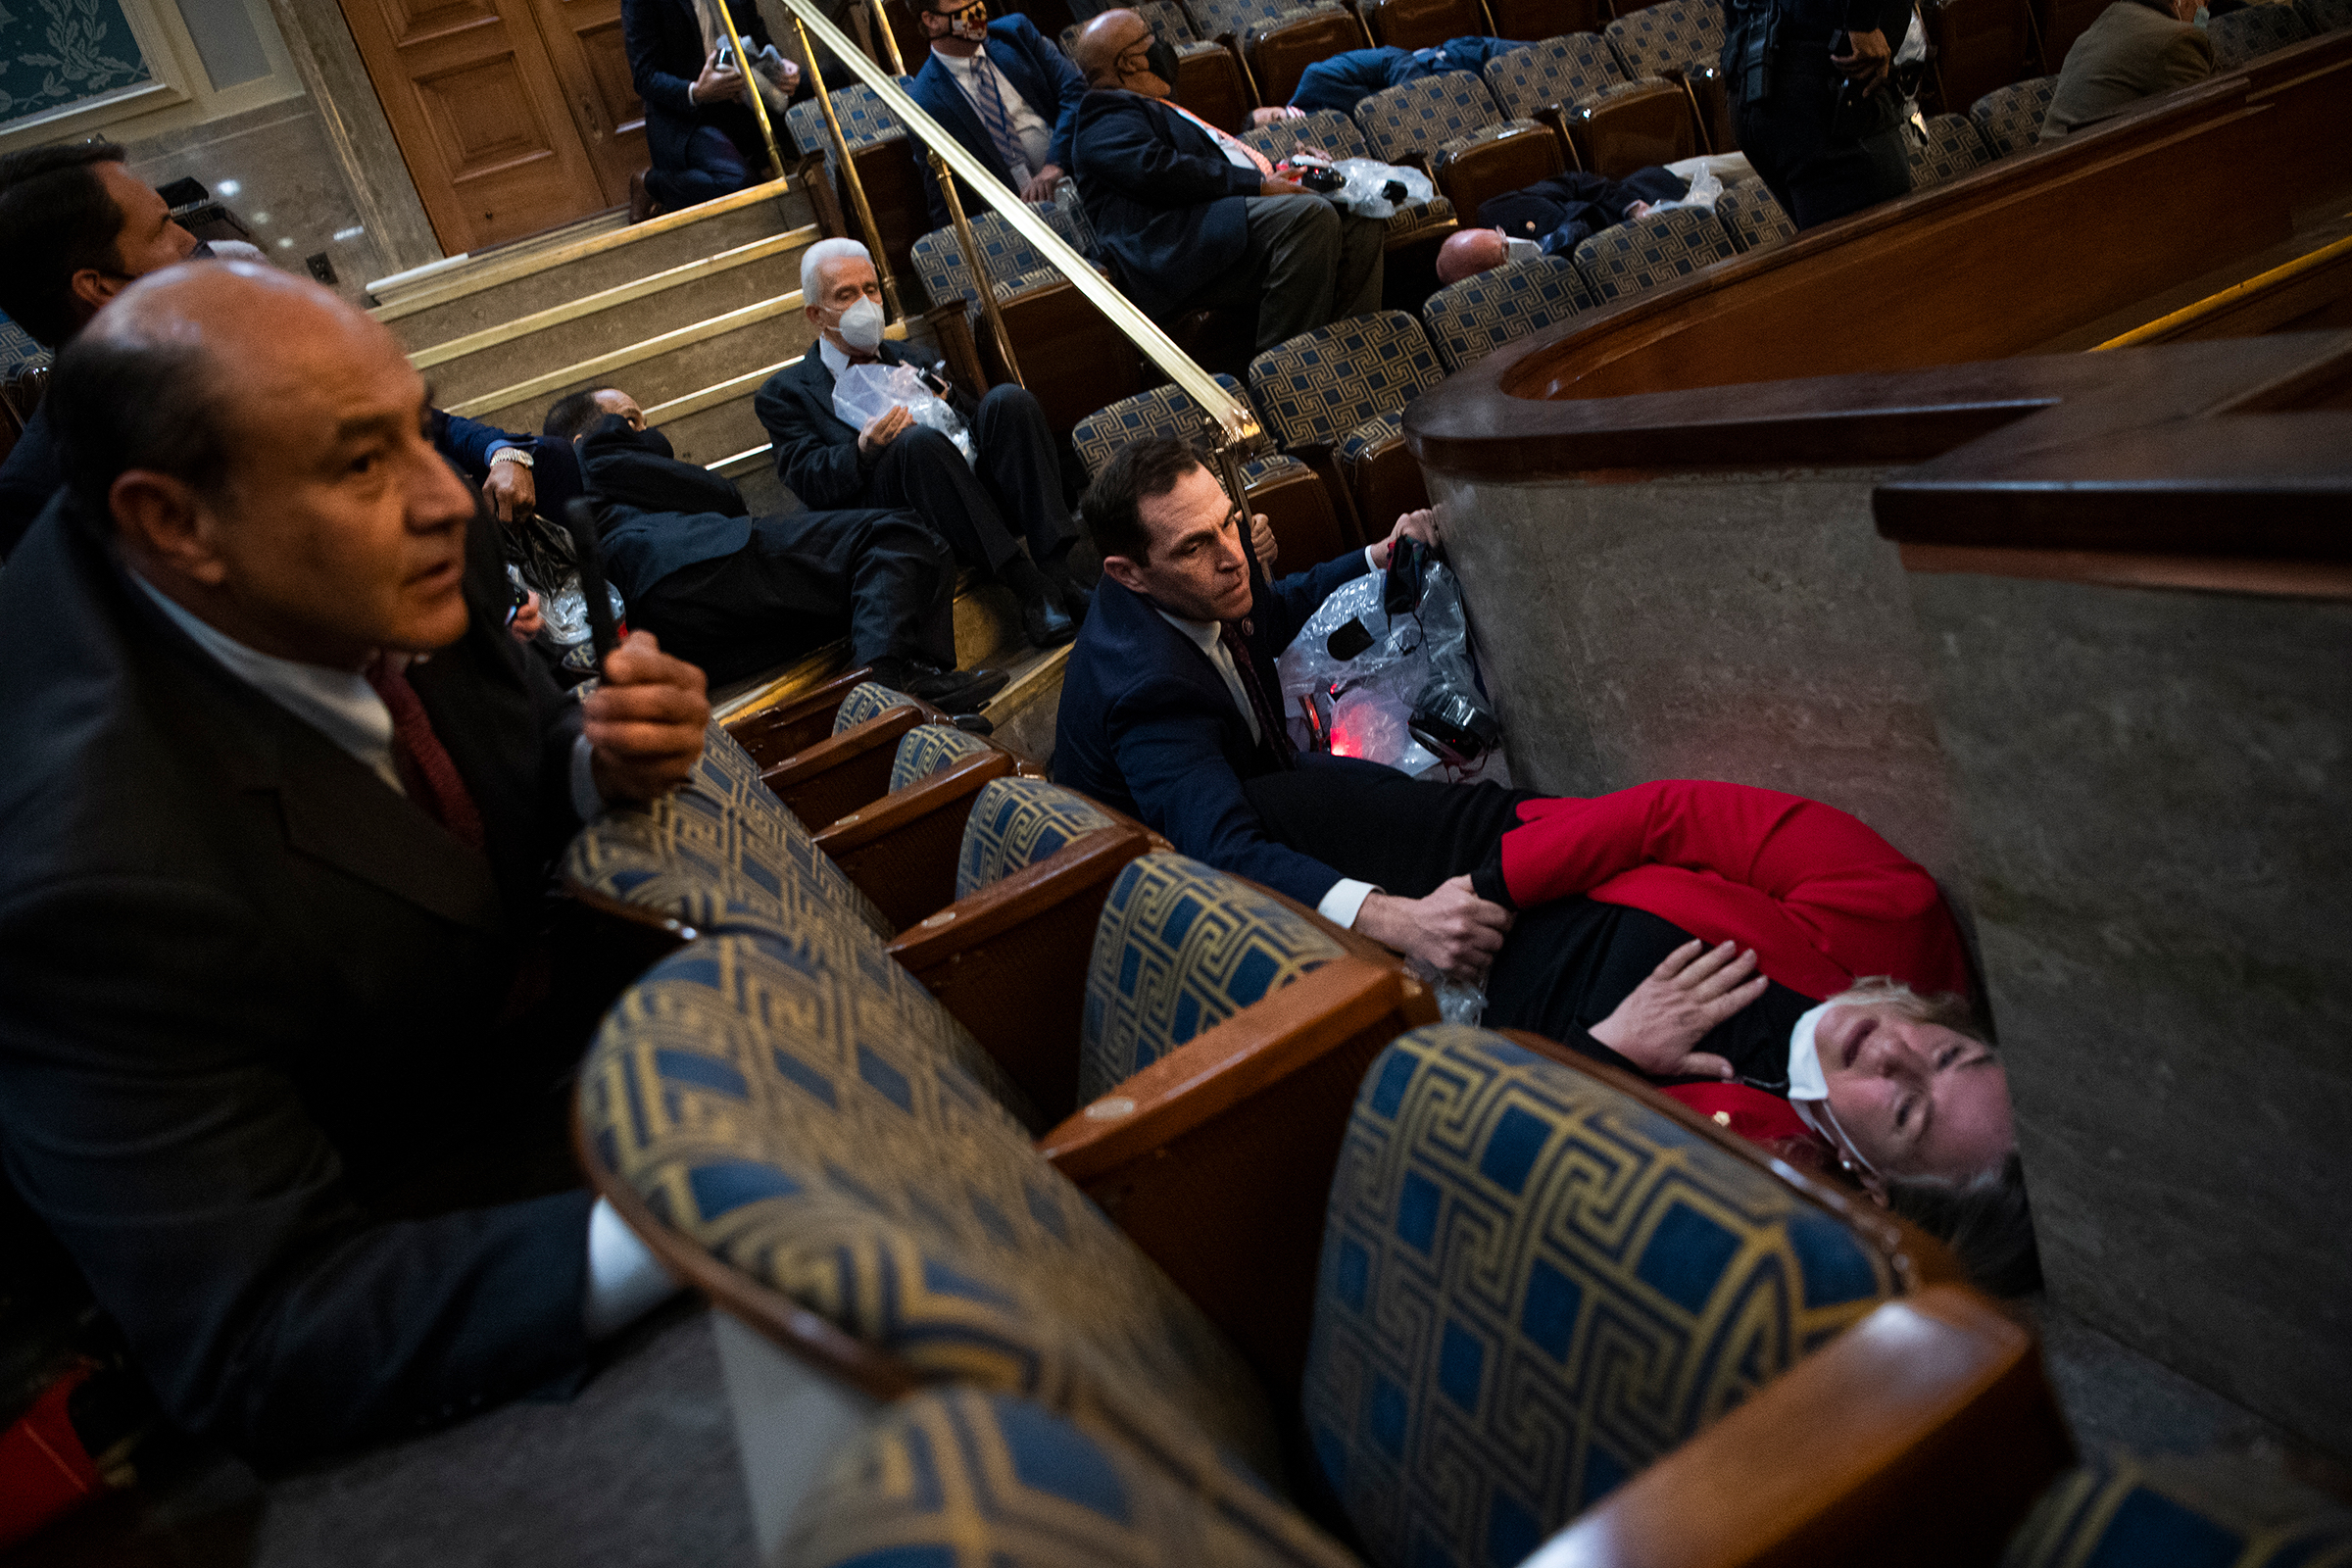 Rep. Jason Crow, D-Colo., comforts Rep. Susan Wild, D-Pa., while taking cover in the Capitol on Jan. 6 as rioters disrupt the joint session of Congress to certify Joe Biden's win over Donald Trump in the 2020 election.